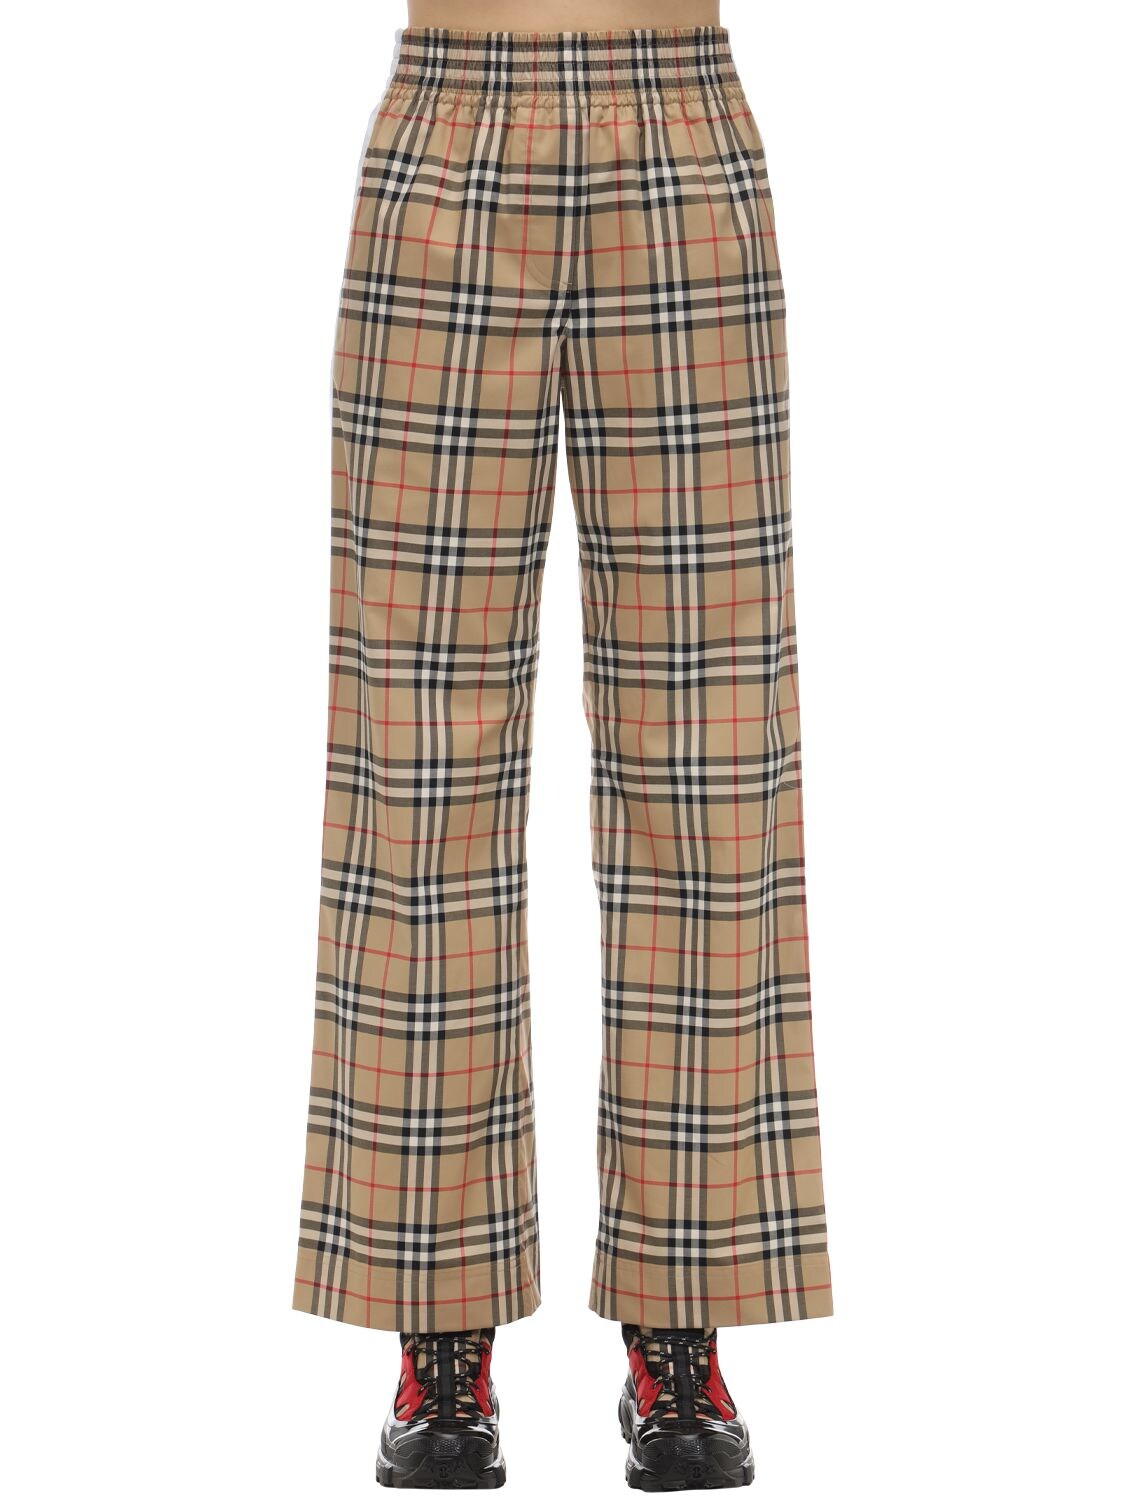 Burberry Check Cotton Poplin Pants W/ Side Bands In Archive Check ...